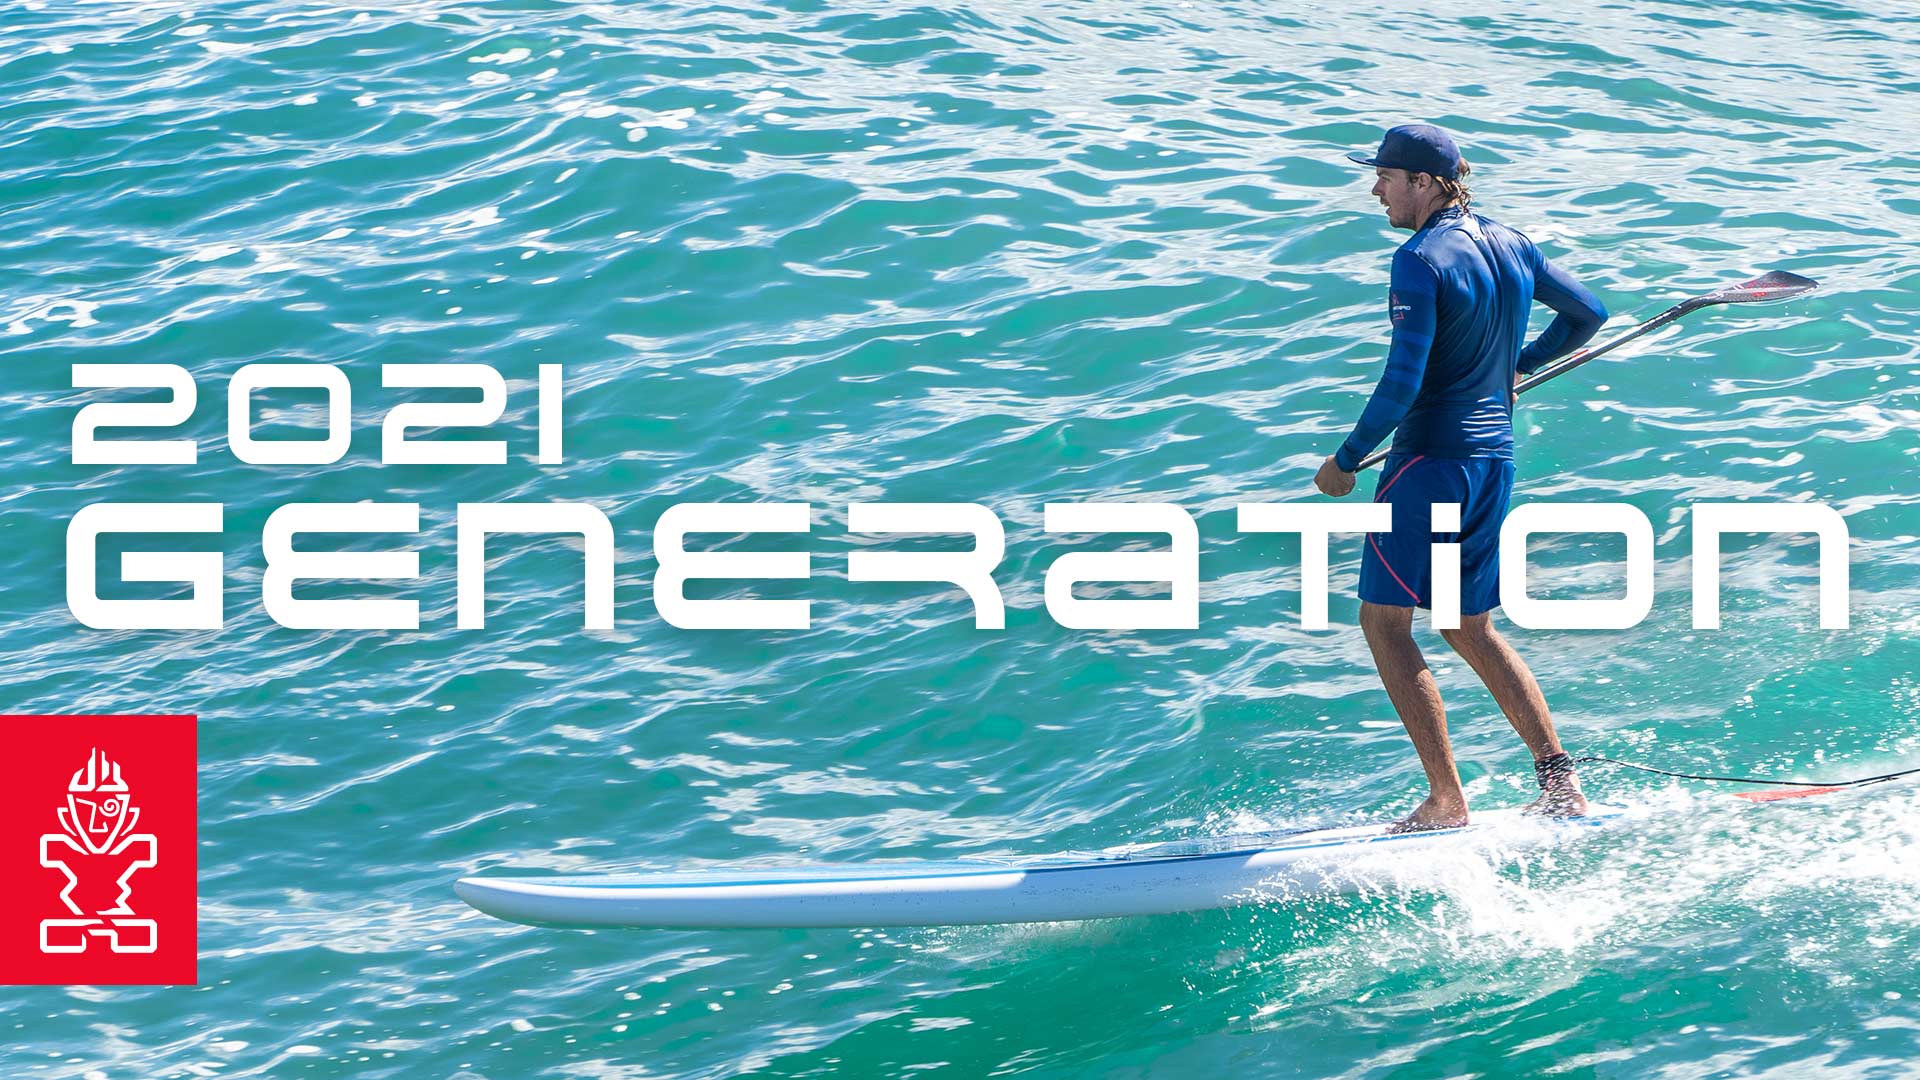 2021 Generation » Starboard SUP